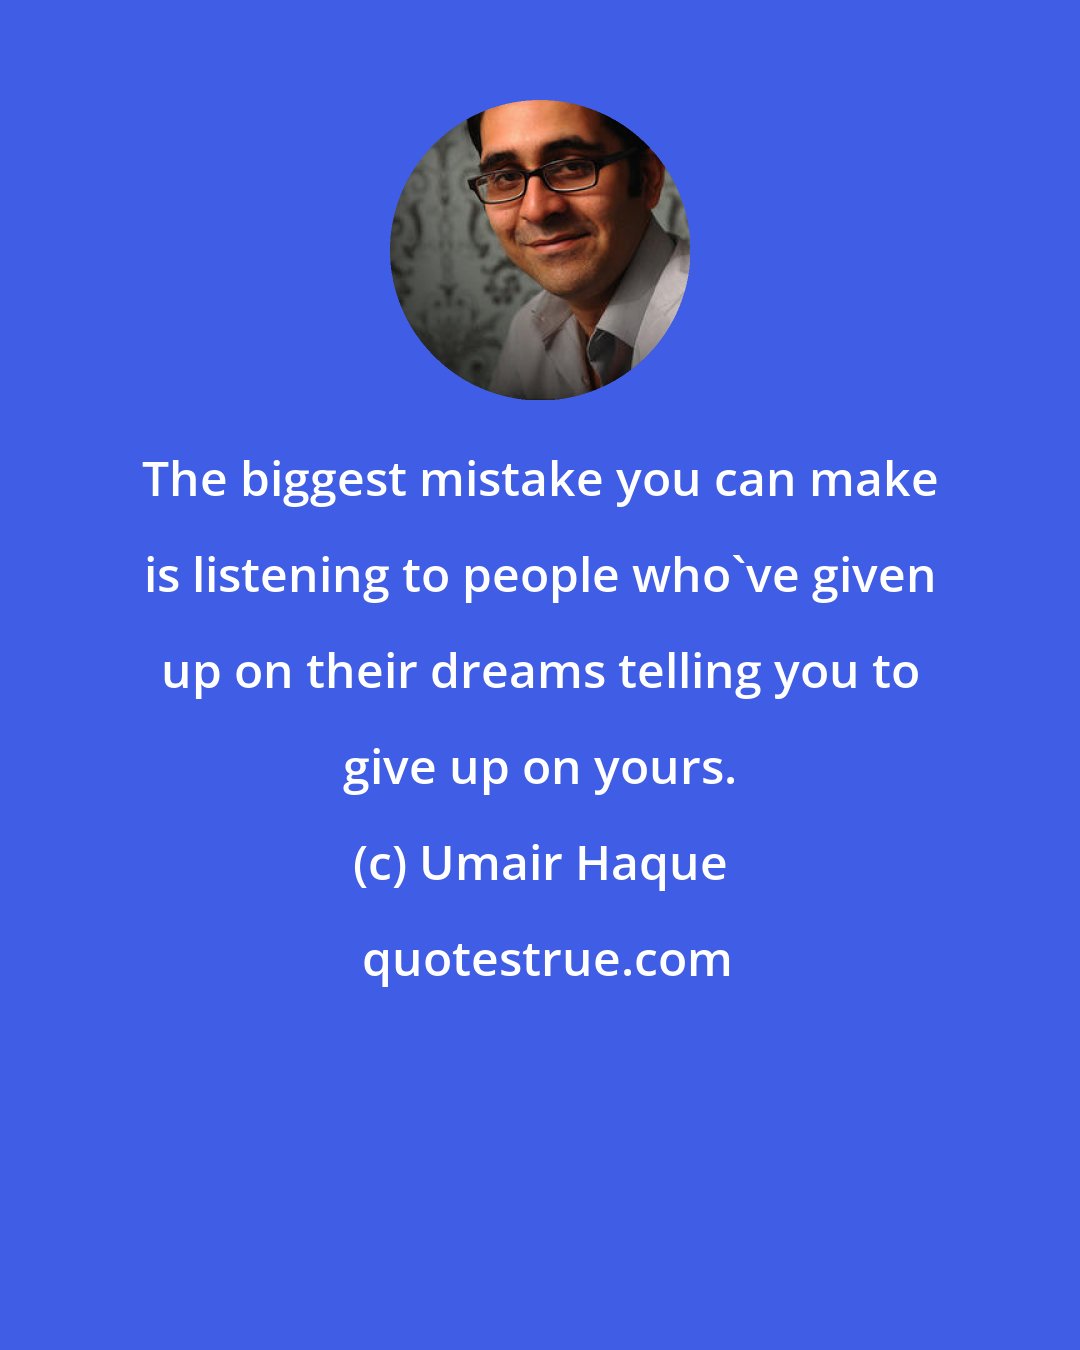 Umair Haque: The biggest mistake you can make is listening to people who've given up on their dreams telling you to give up on yours.